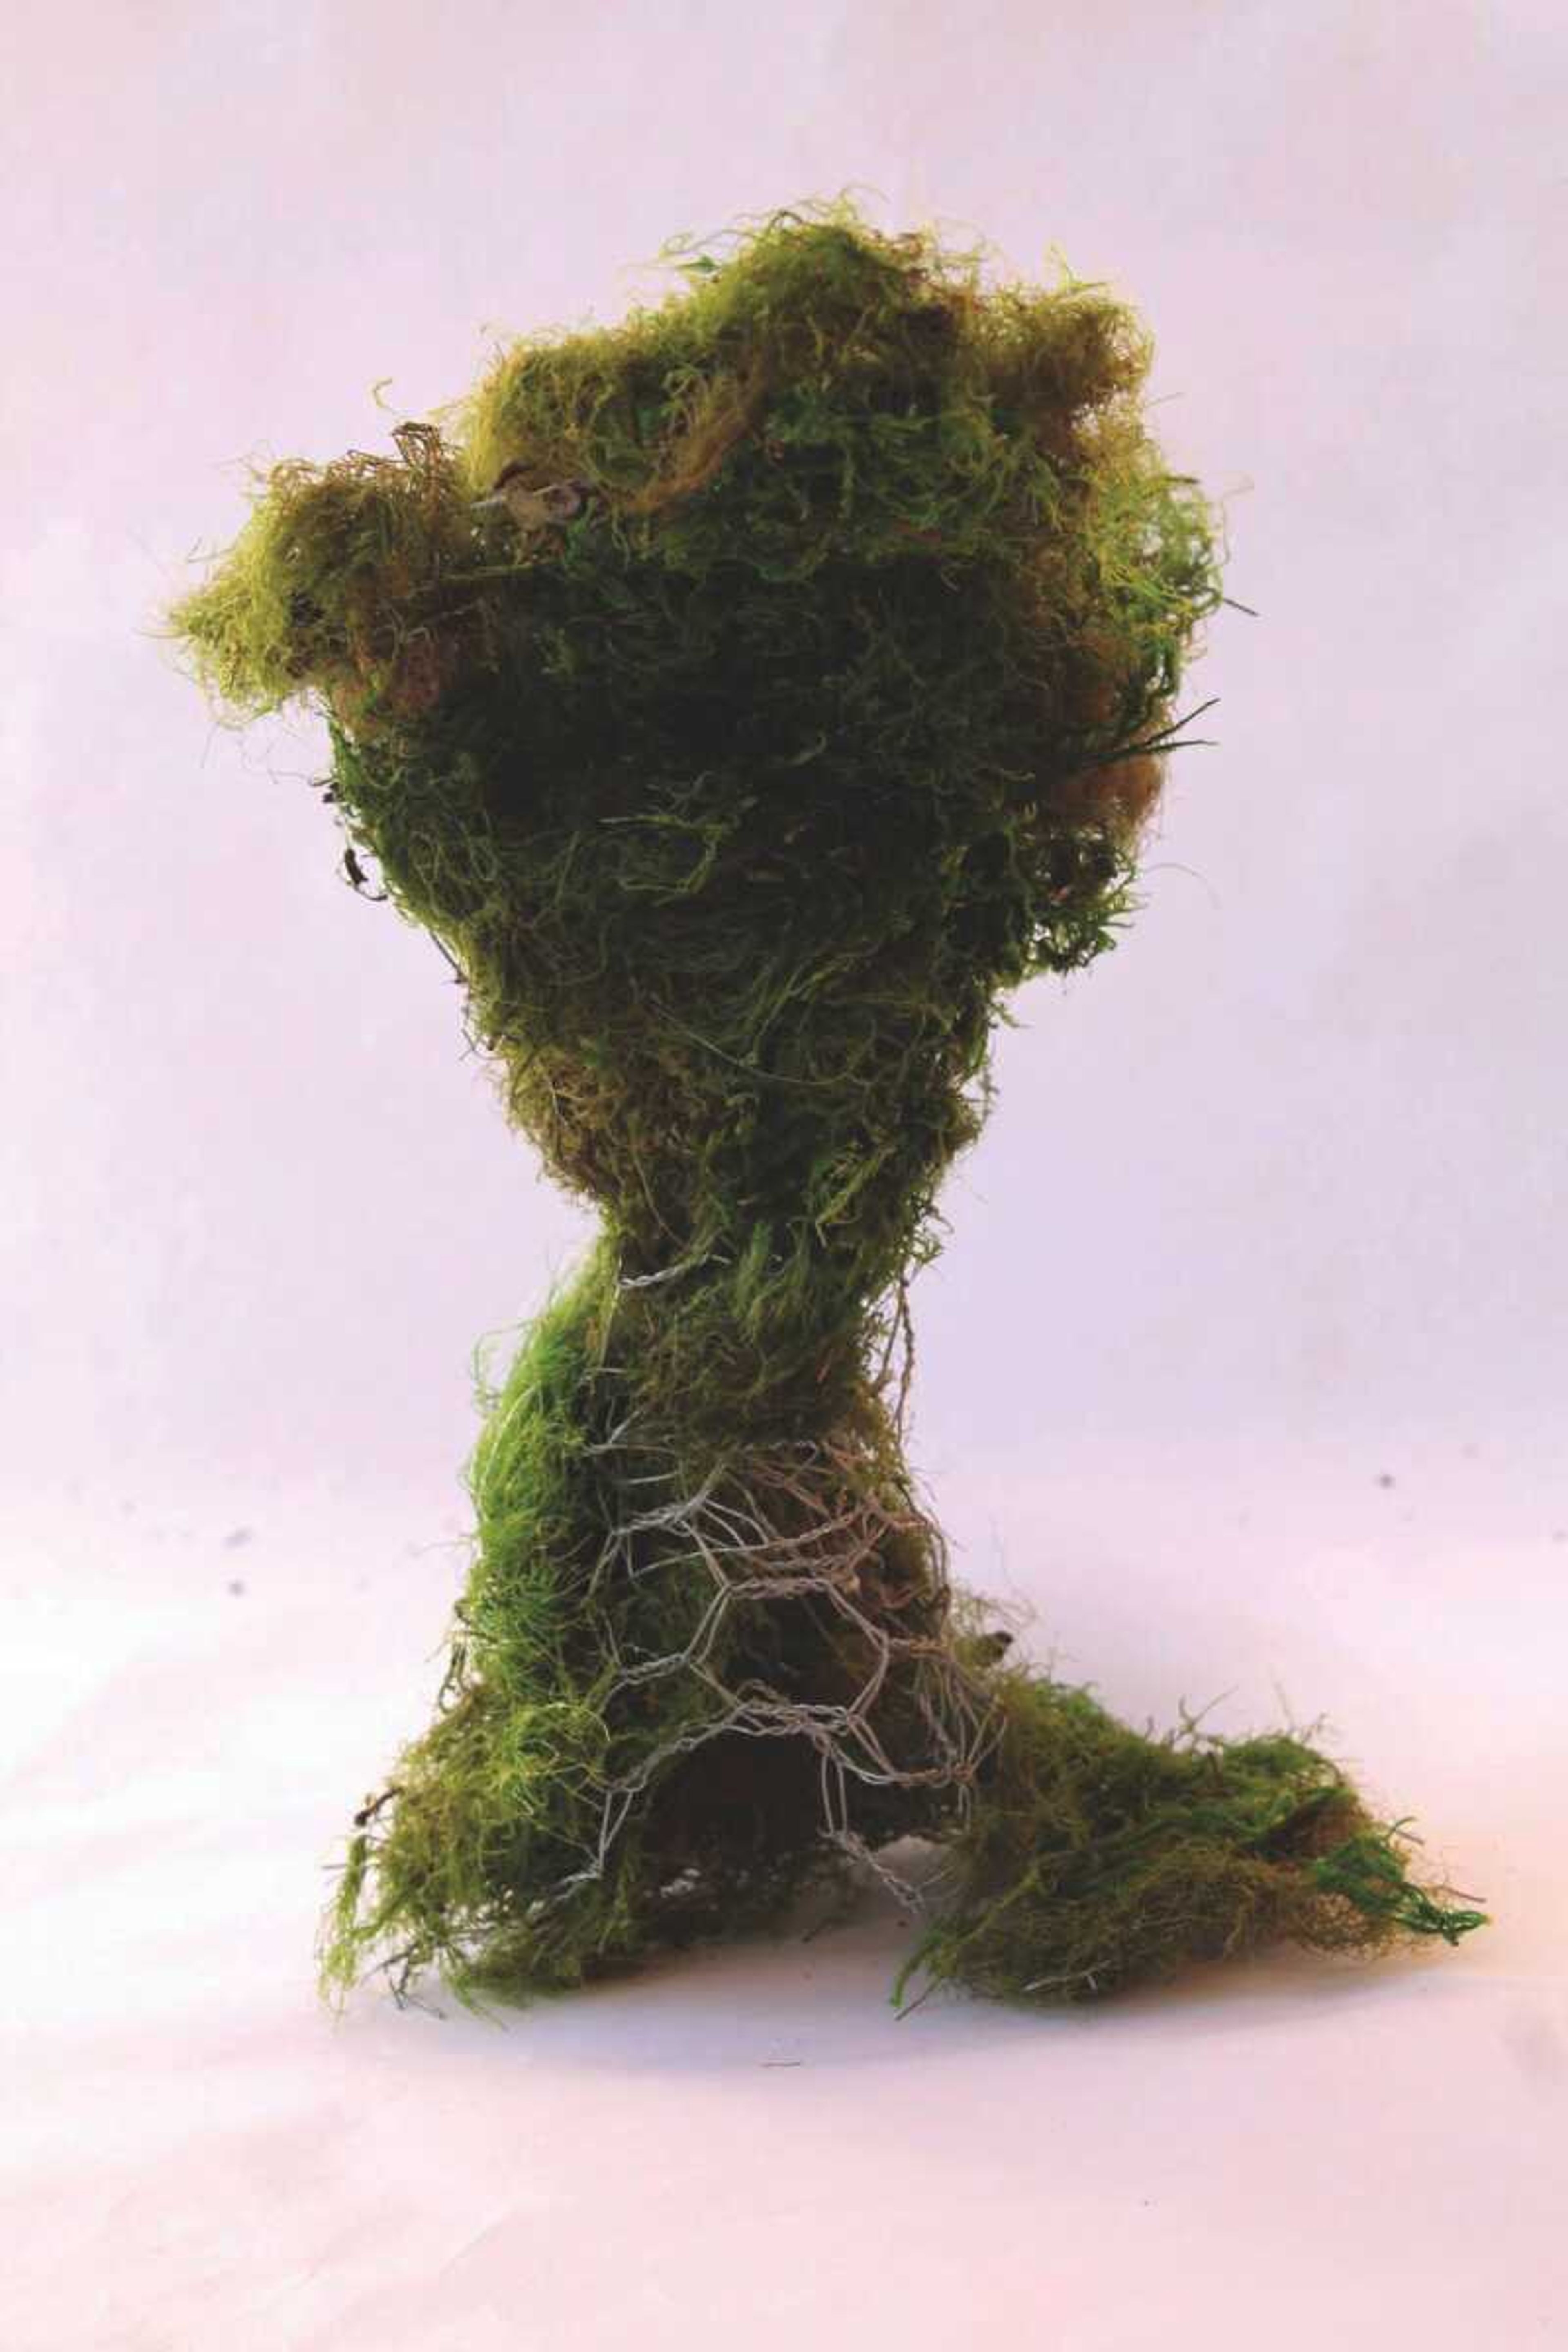 Kelsey Rost has created moss sculptures that will appear at the group exhibition on Friday at Cateye Glasses Studio.